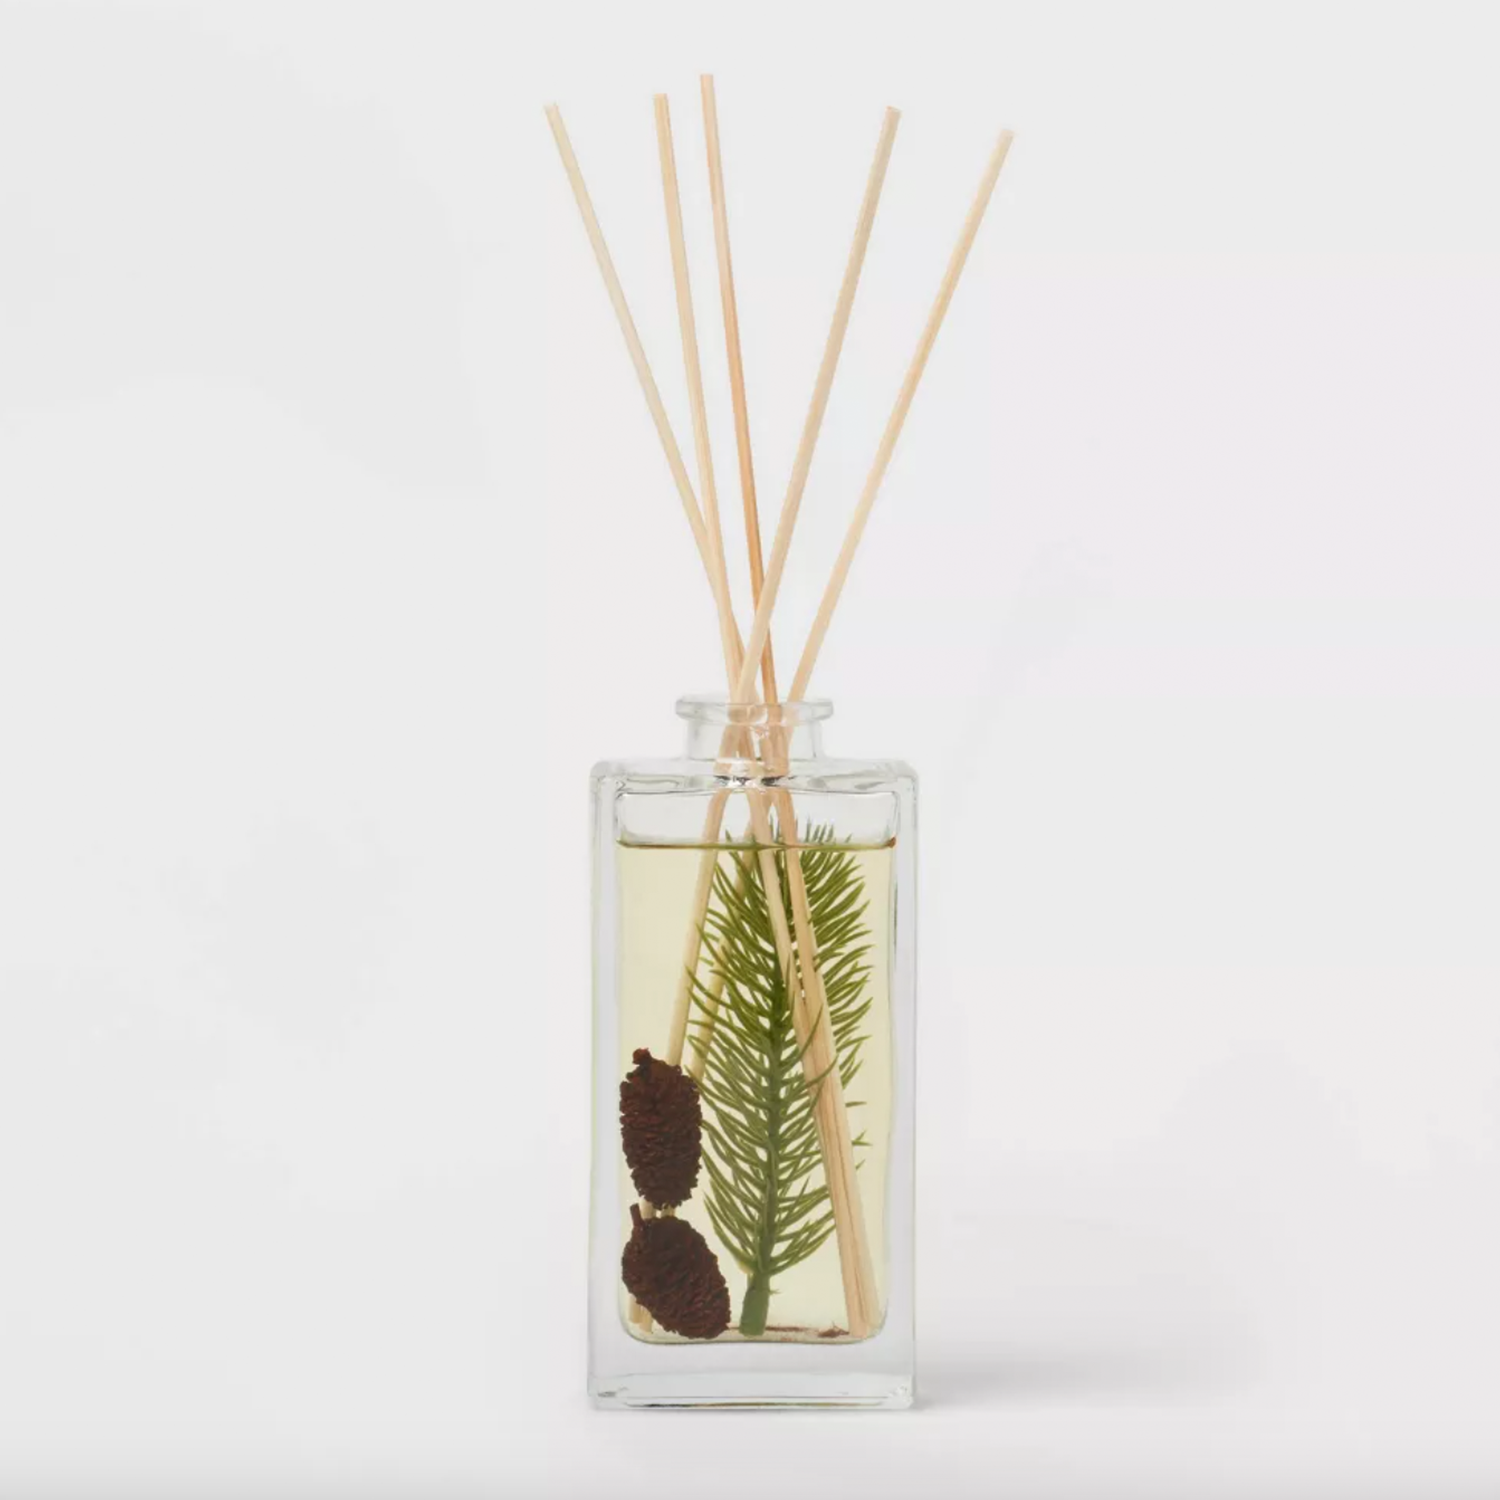 Pine cone reed diffuser from target